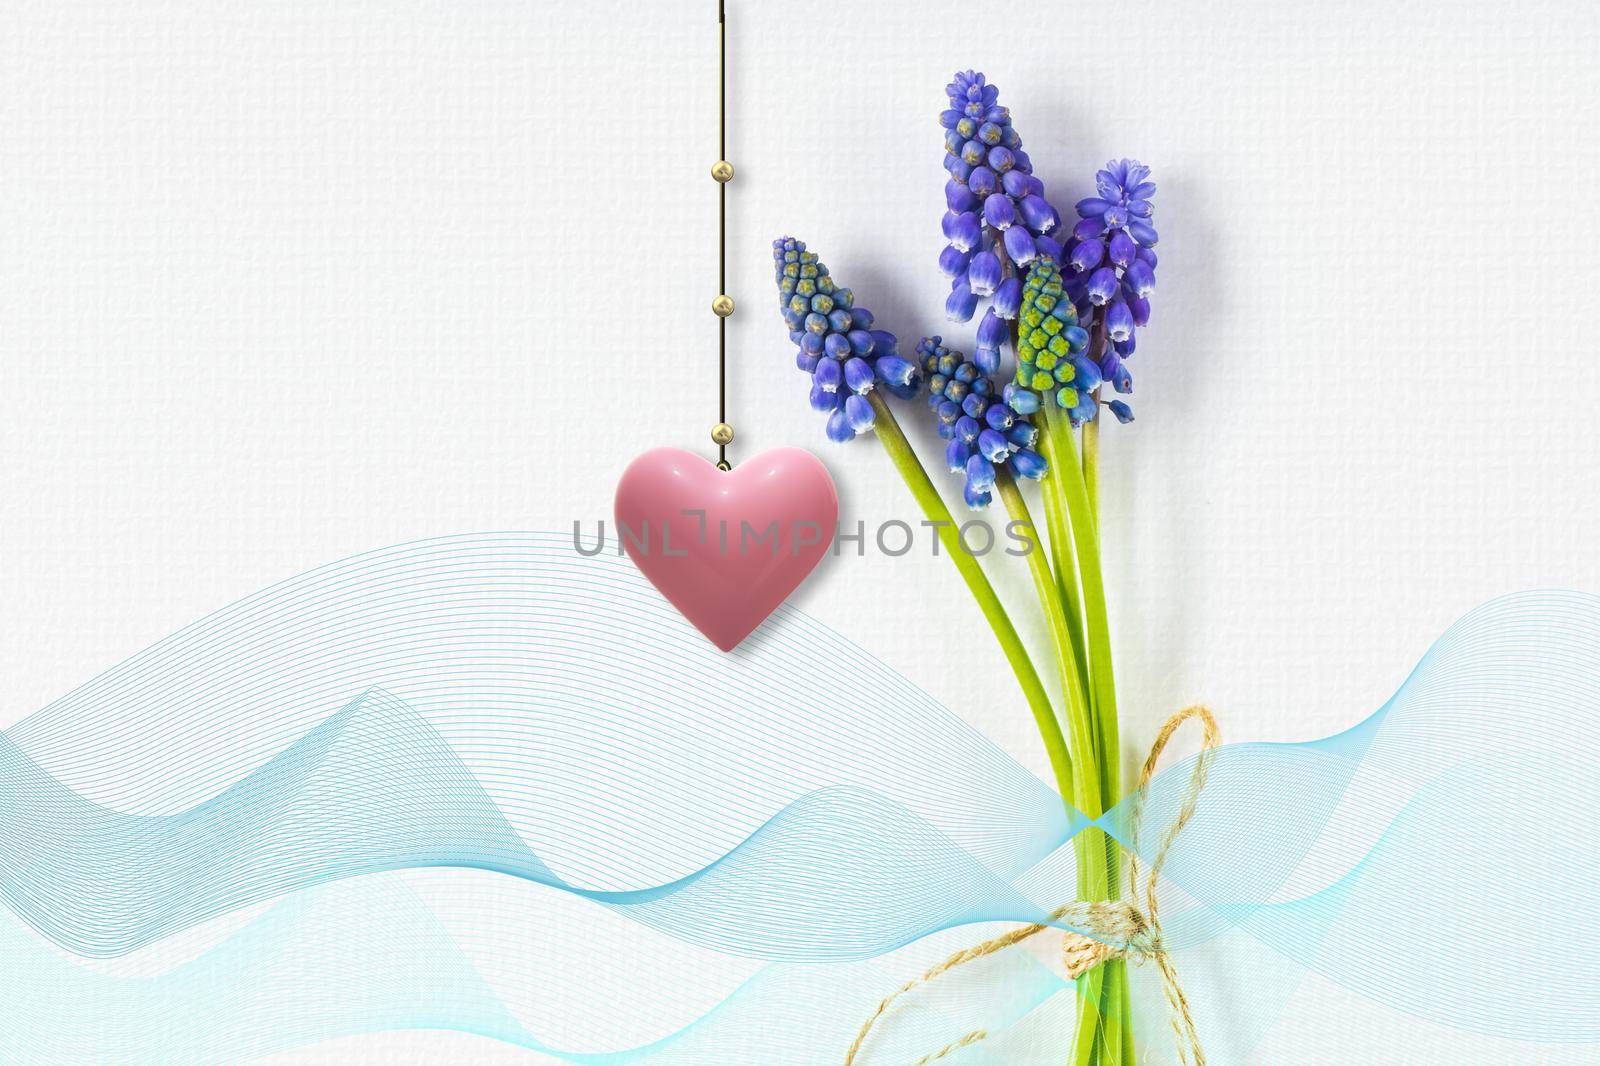 Festive spring blue flower composition on white background with ribbon and hanging 3d pink heart